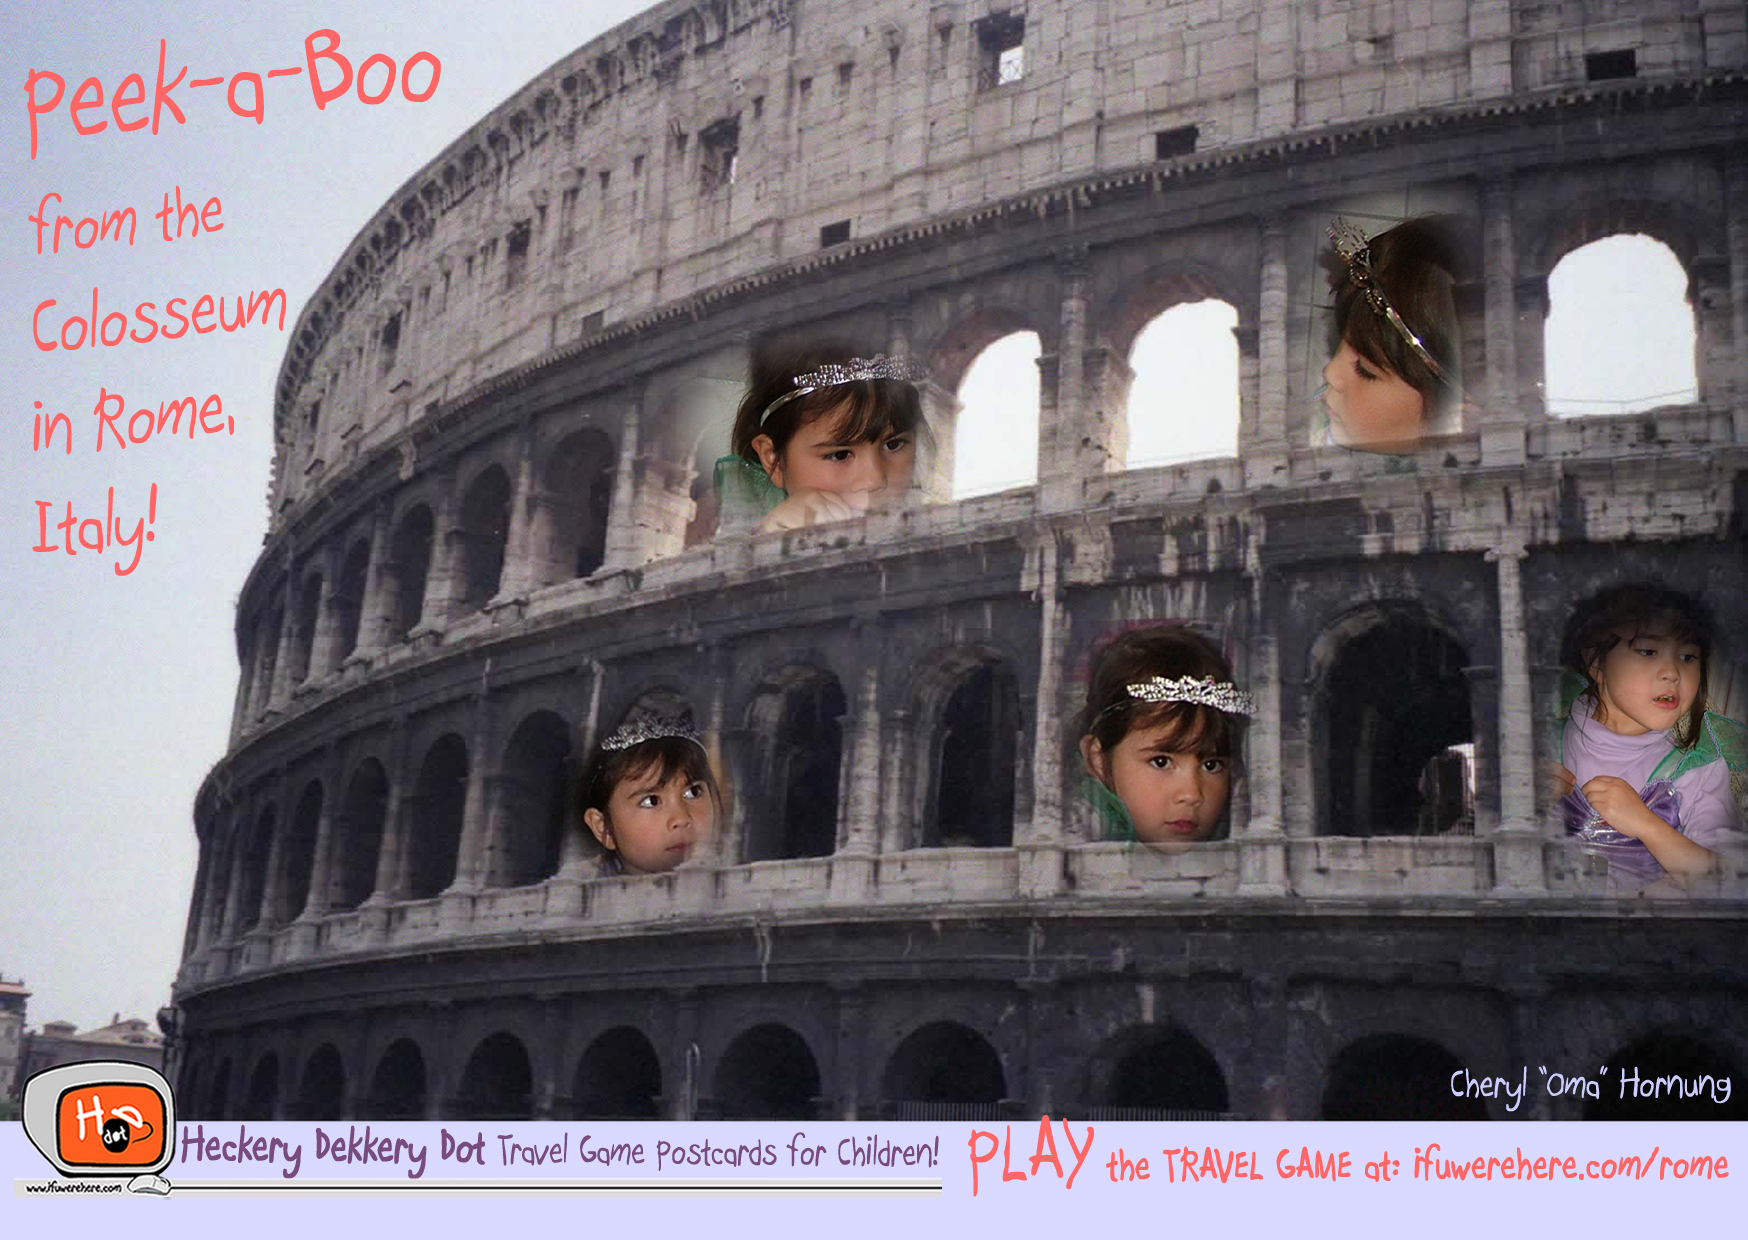 (5) Hold on to your tiara!  Peek-a-Boo fom the Colosseum!